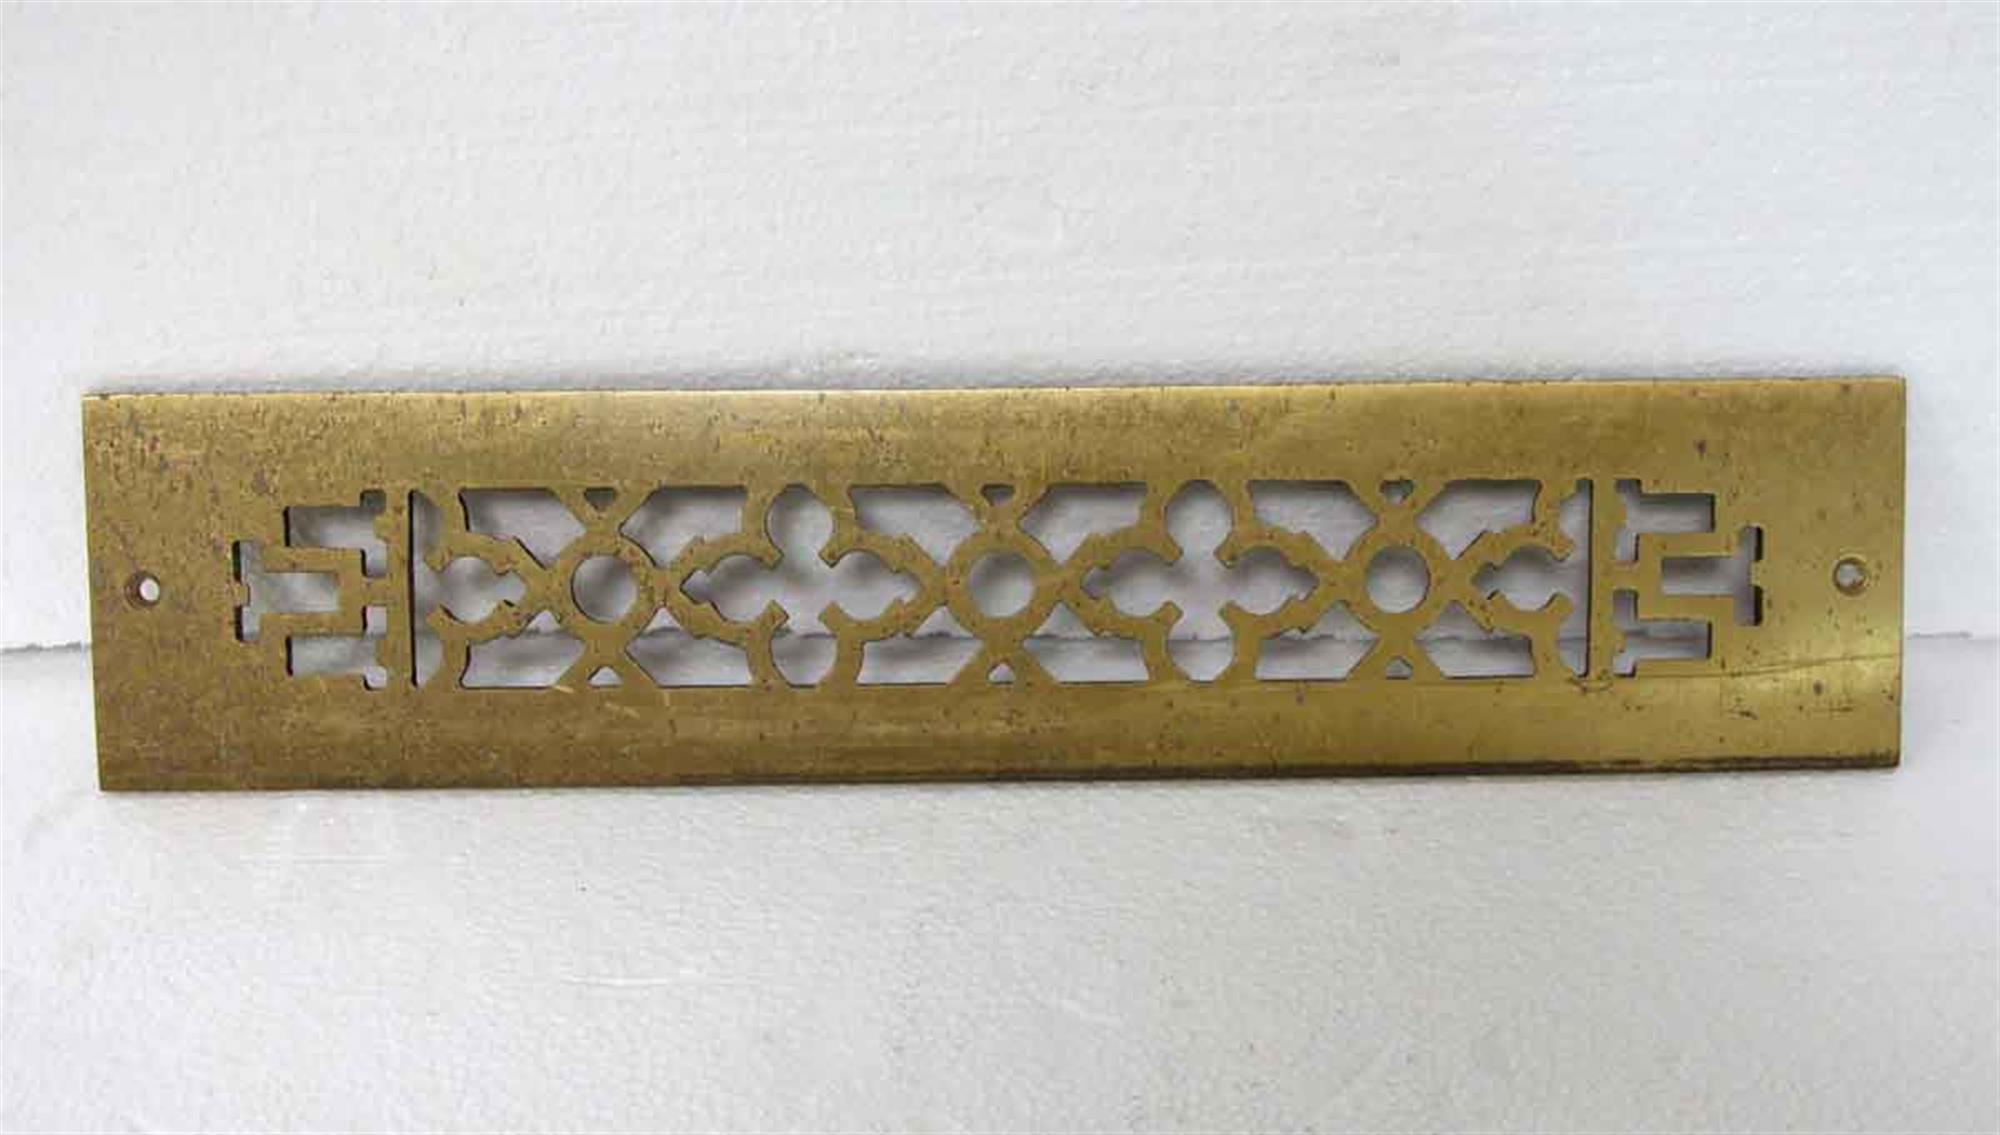 1988 NYC Waldorf Astoria bronze Hotel Resister or grate. Stamped 1988 The Reggio Register Co., Inc. Waldorf Astoria authenticity card included with your purchase. Small quantity available at time of posting. Please inquire. Priced each. Please note,